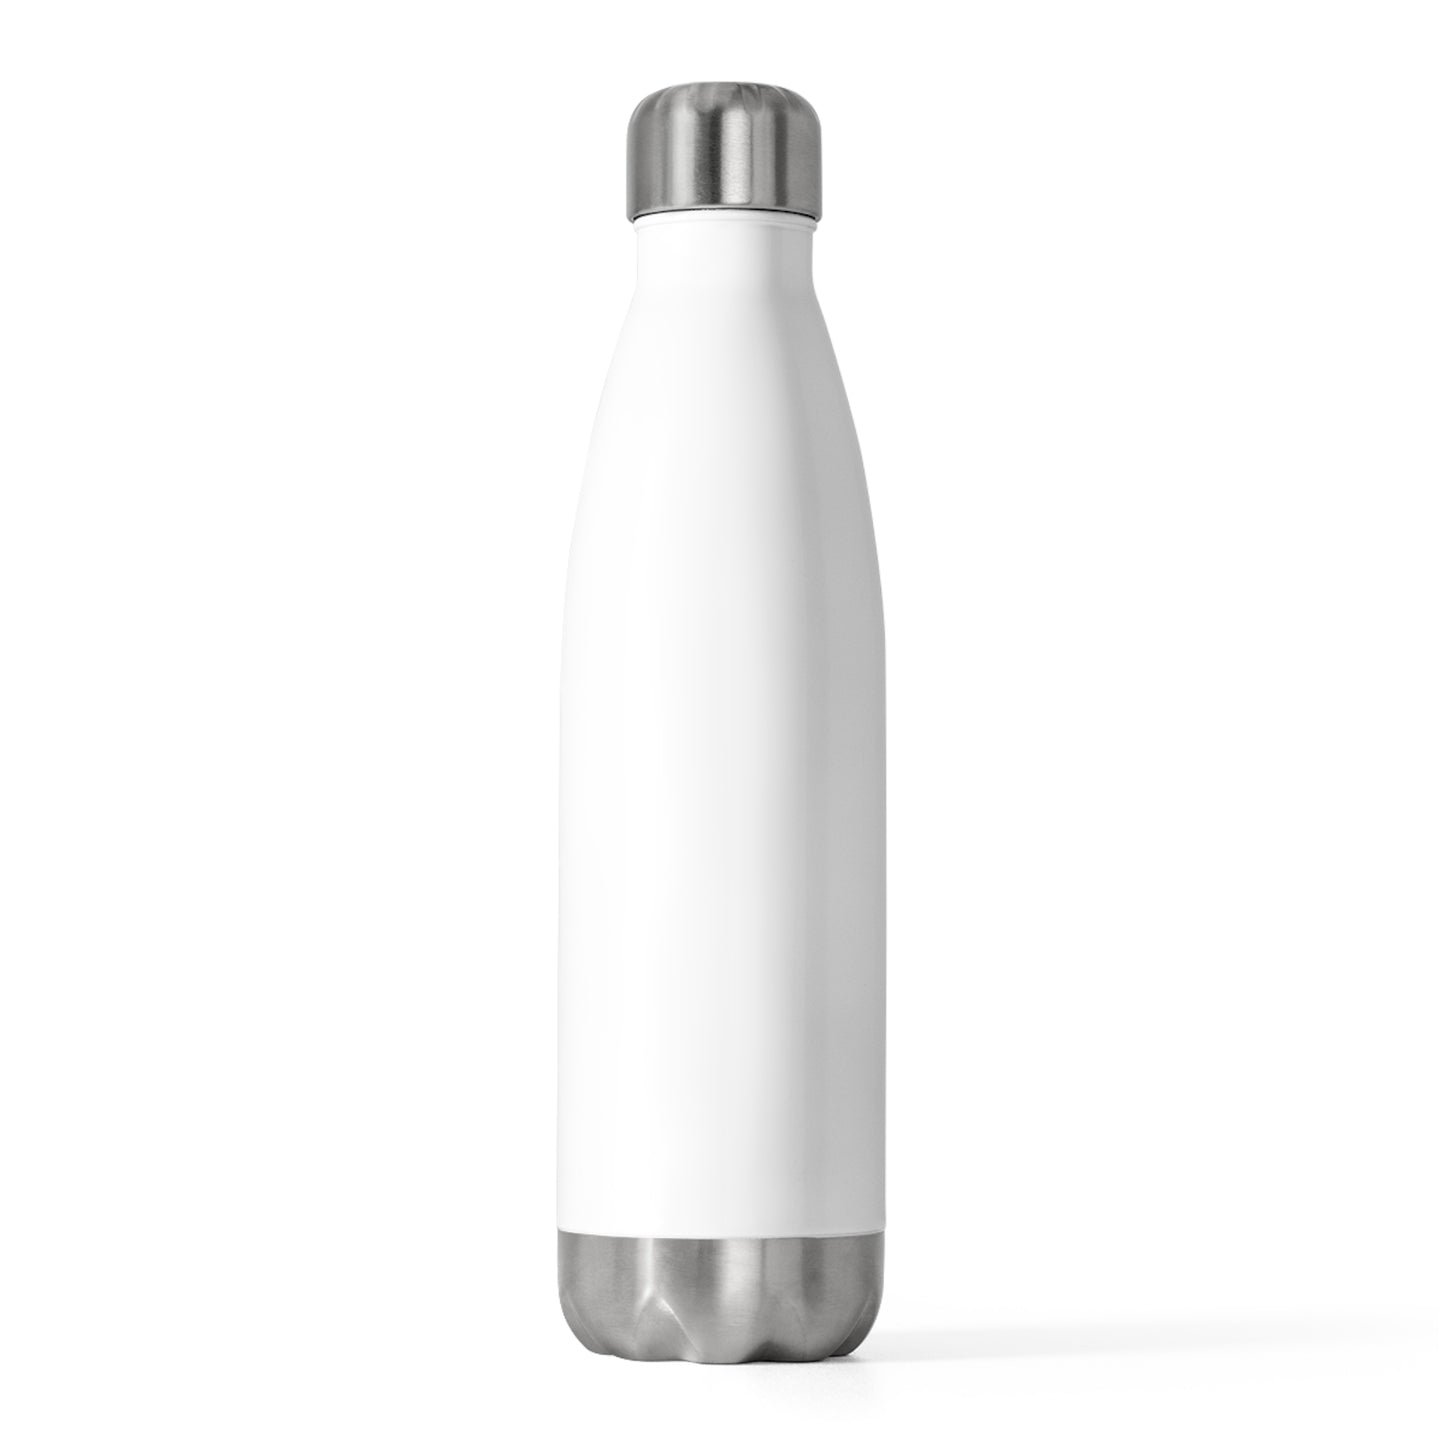 I Am The Miracle Working Wonder Of God (2) Insulated Bottle 20 oz